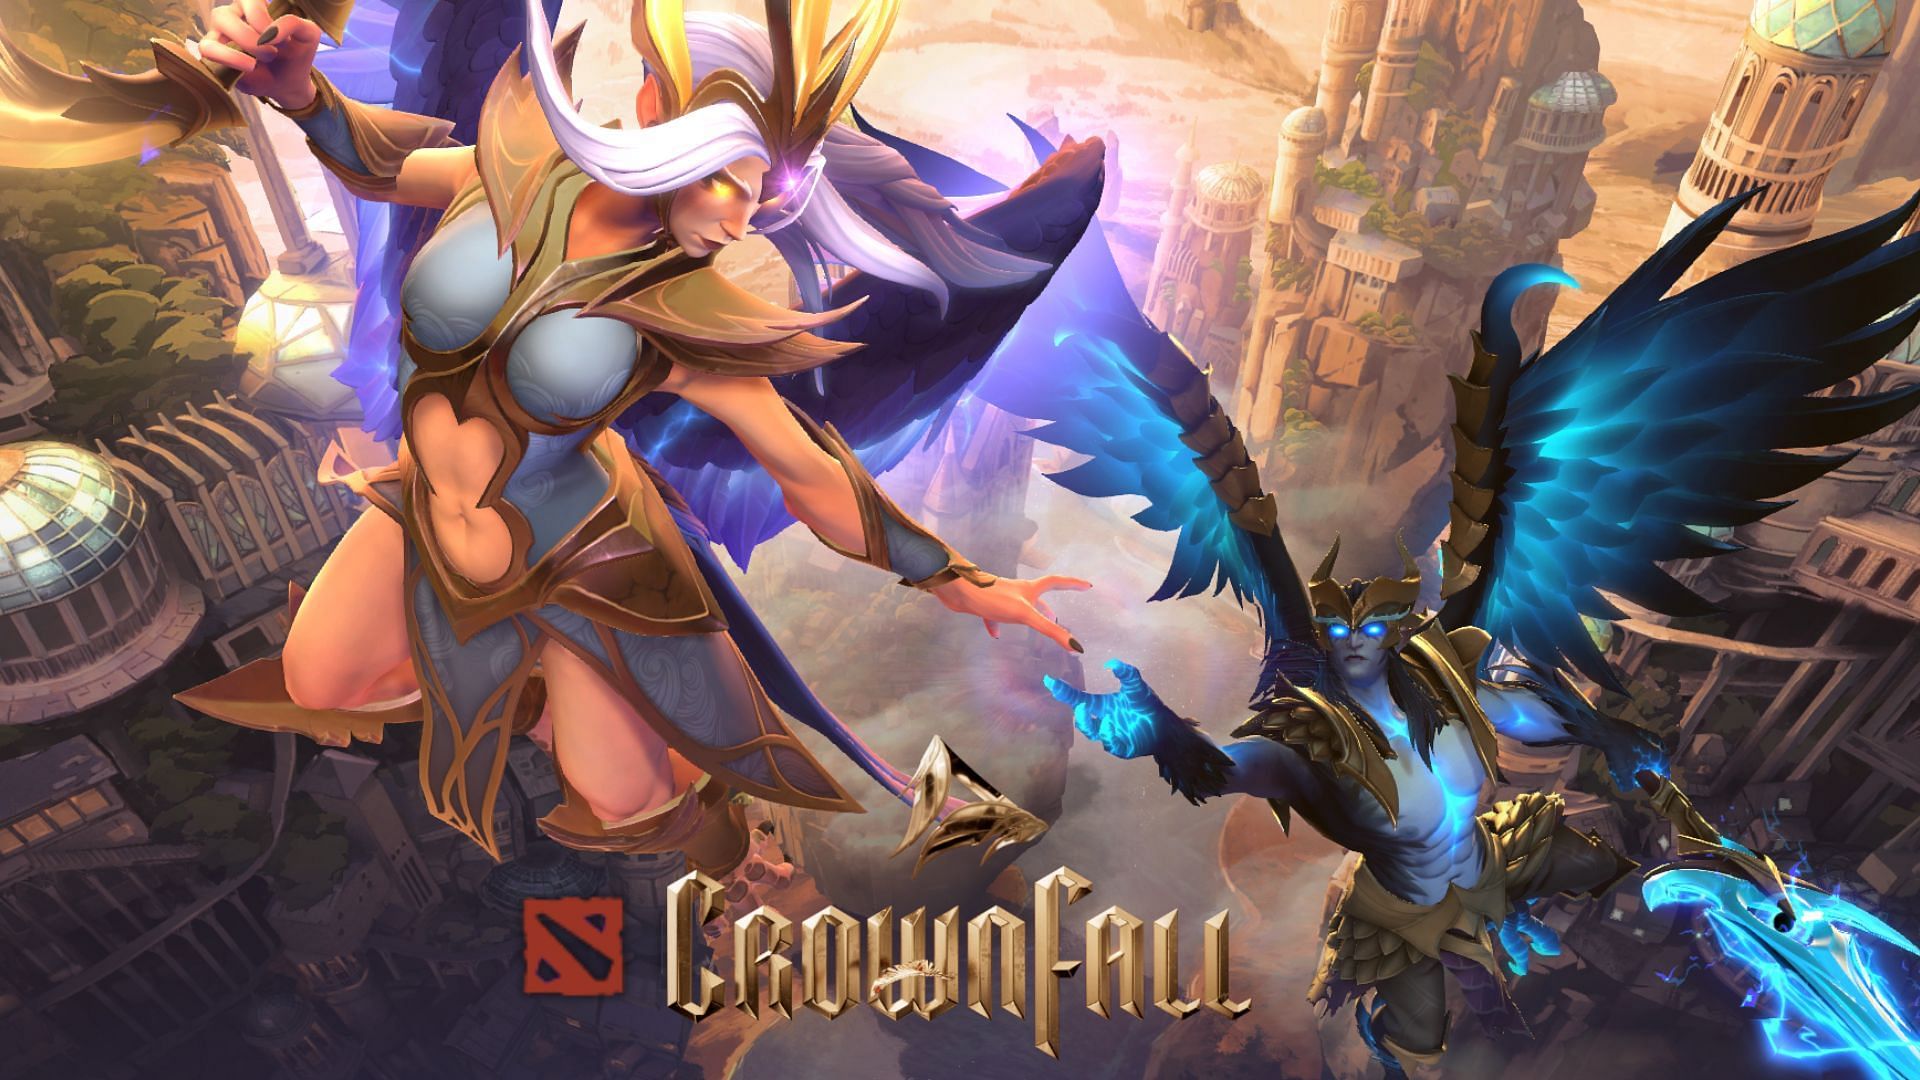 &quot;Crownfall progression is brilliant&quot;: Dota 2 player delighted with latest event